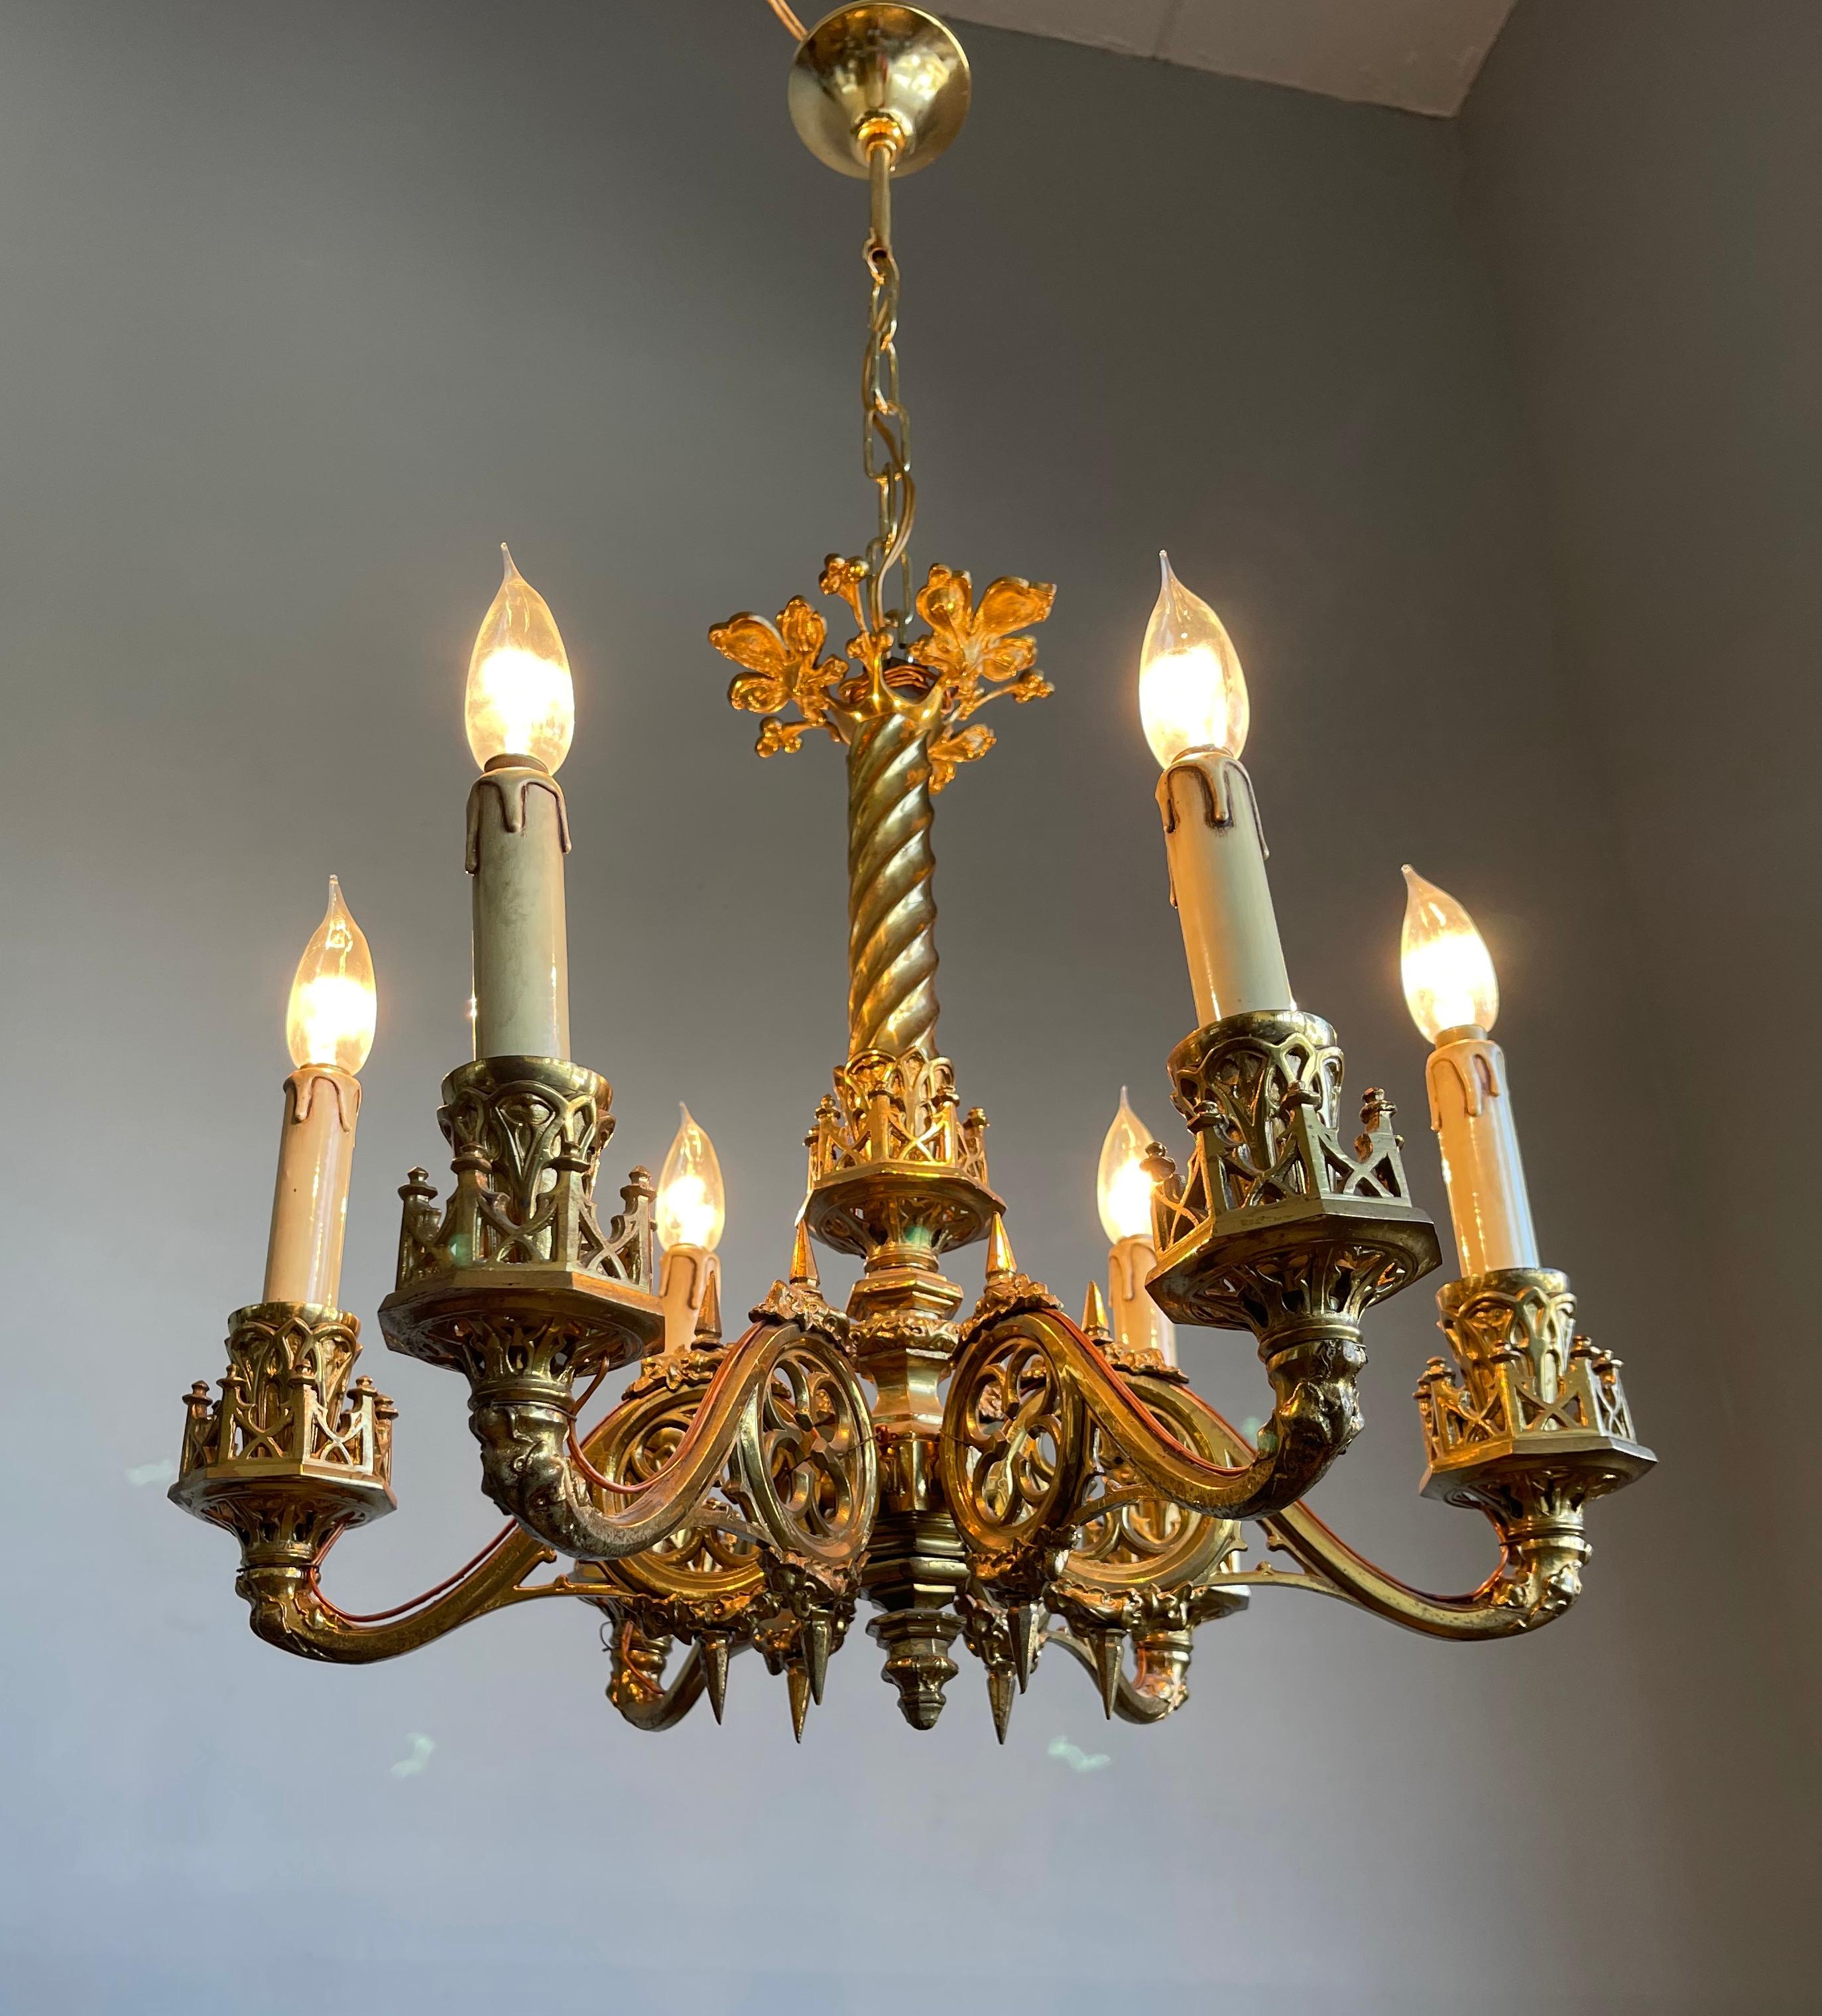 Cast Amazing Hand Crafted Gilt Bronze Gothic Revival Chandelier / Pendant Light, 1900